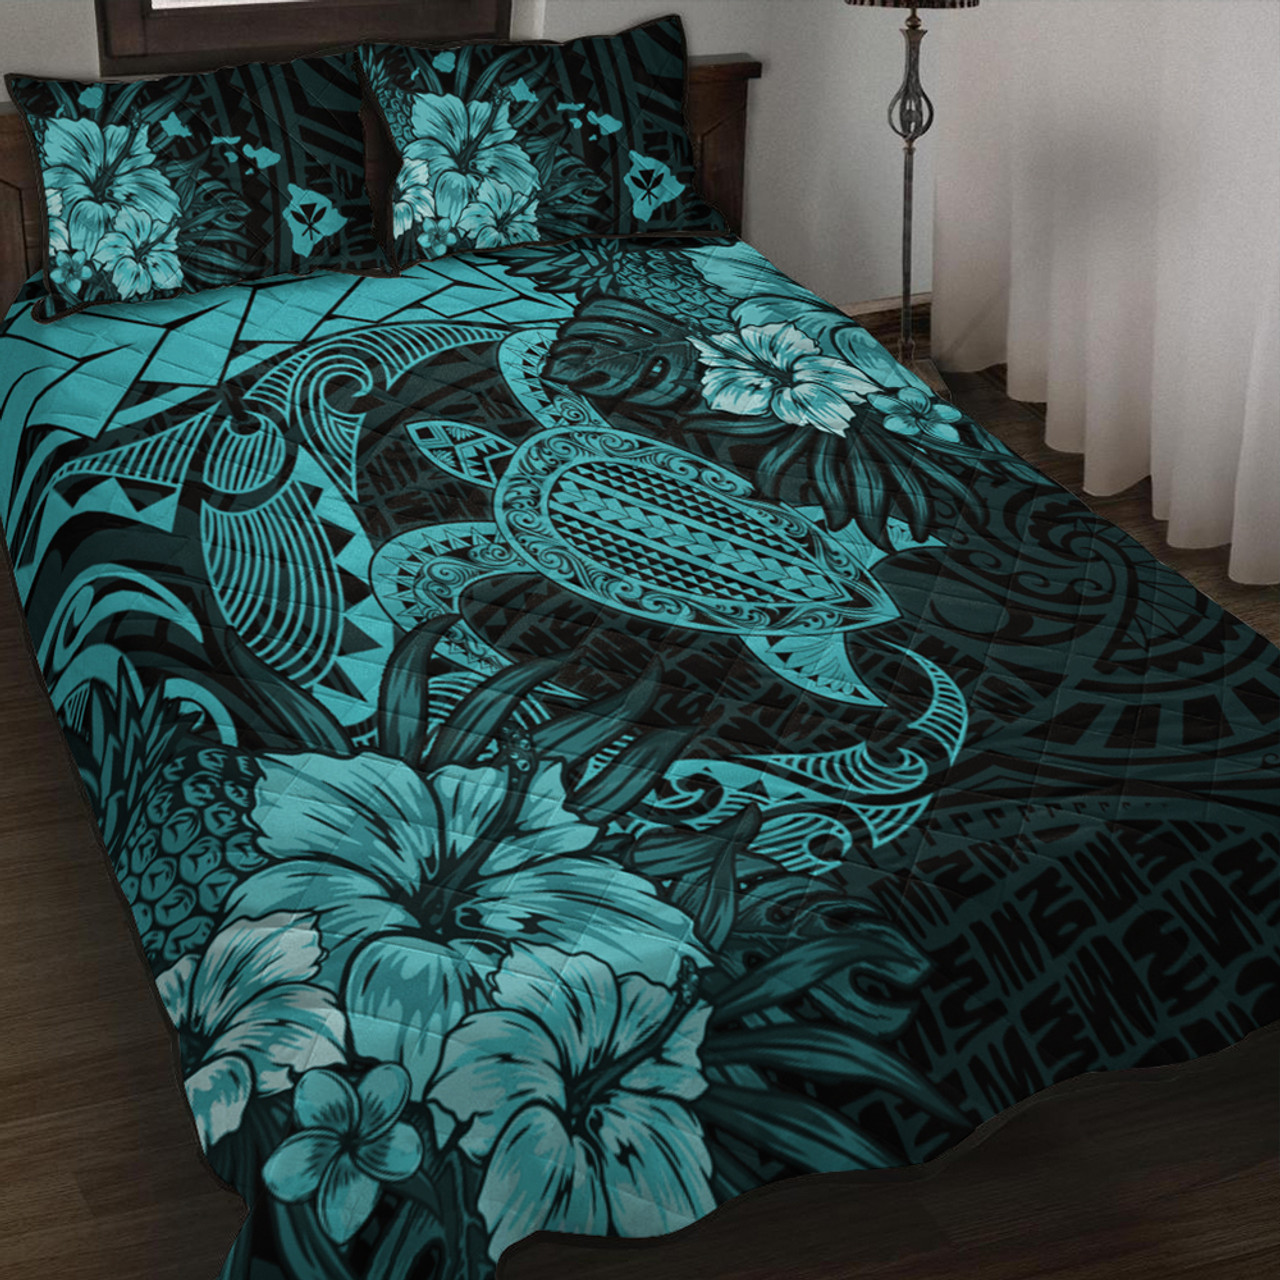 Hawaii Quilt Bed Set Hawaii Polynesian Turtle Tropical Turquoise